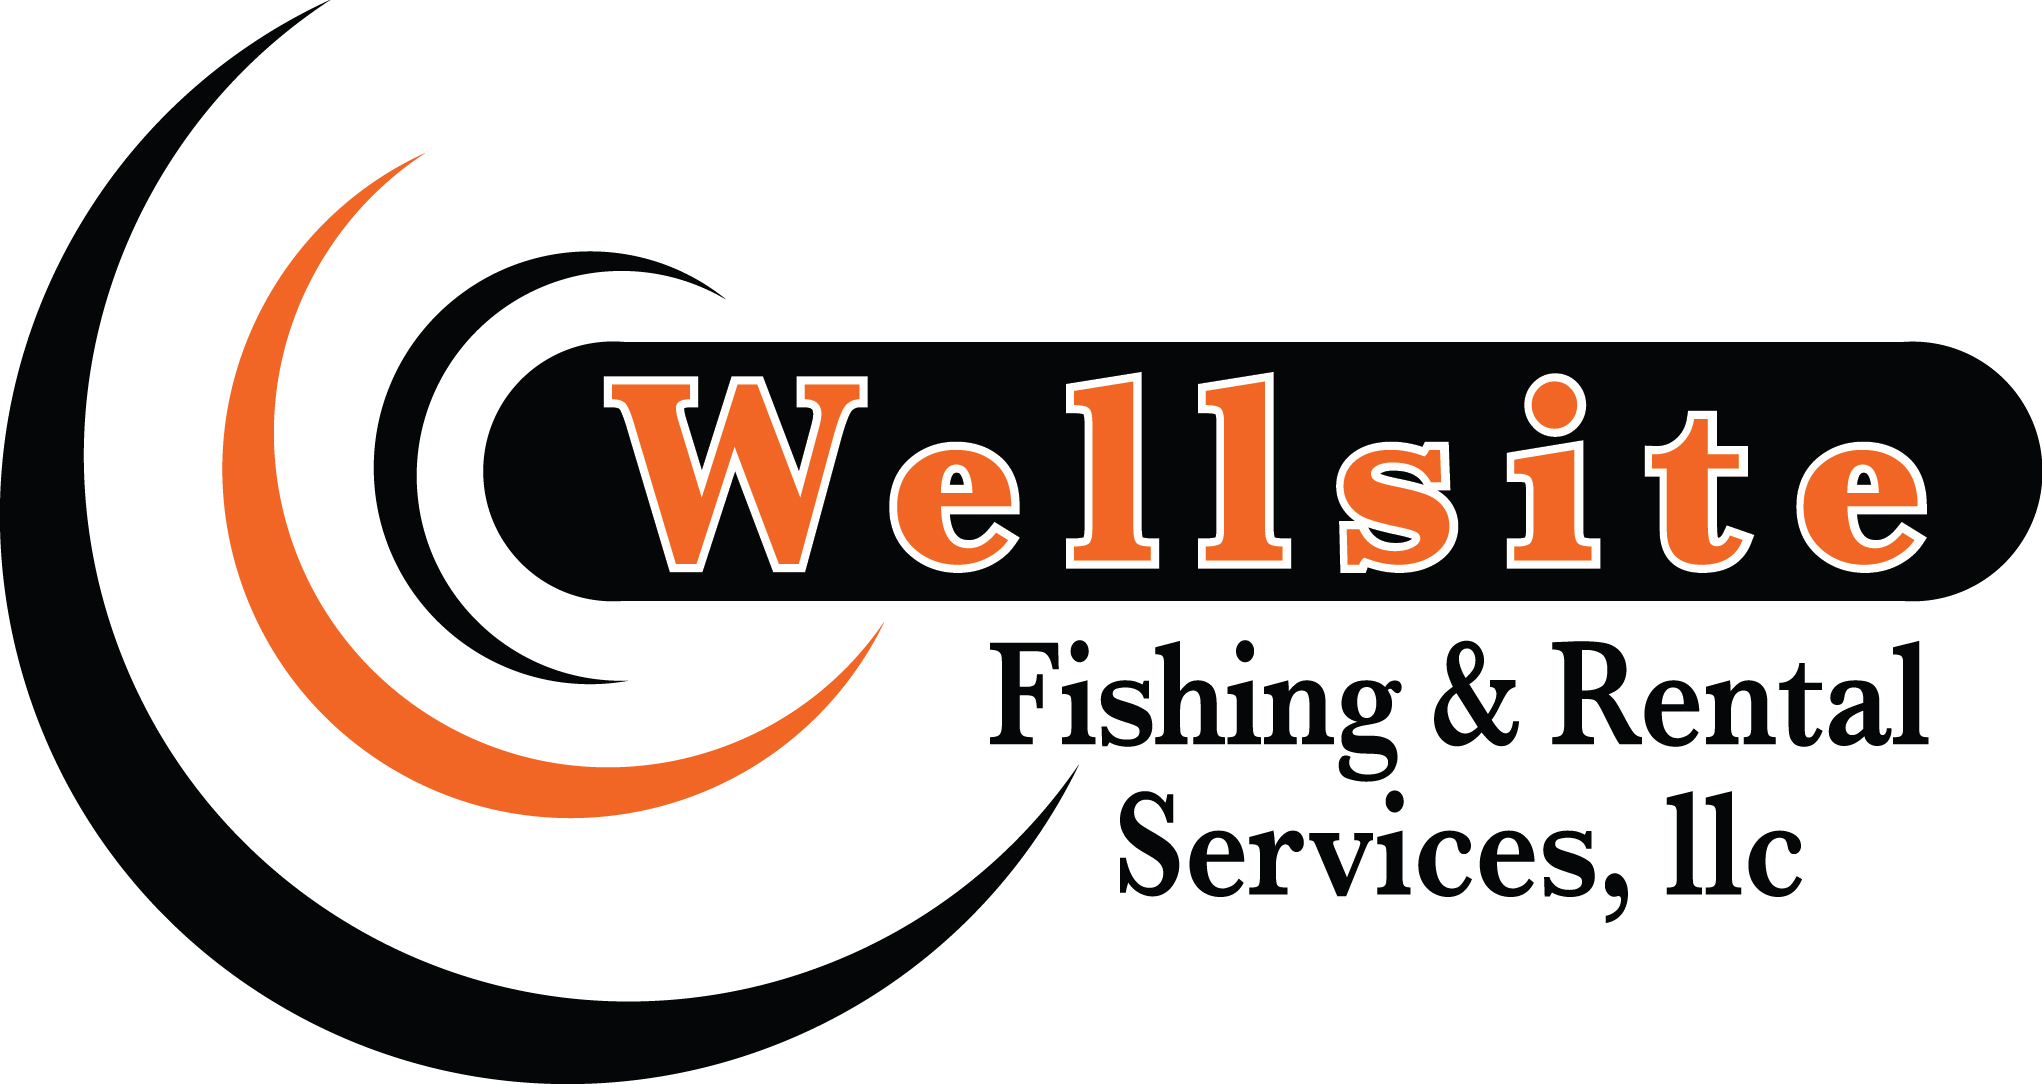 Wellsite Fishing and Rental Services logo